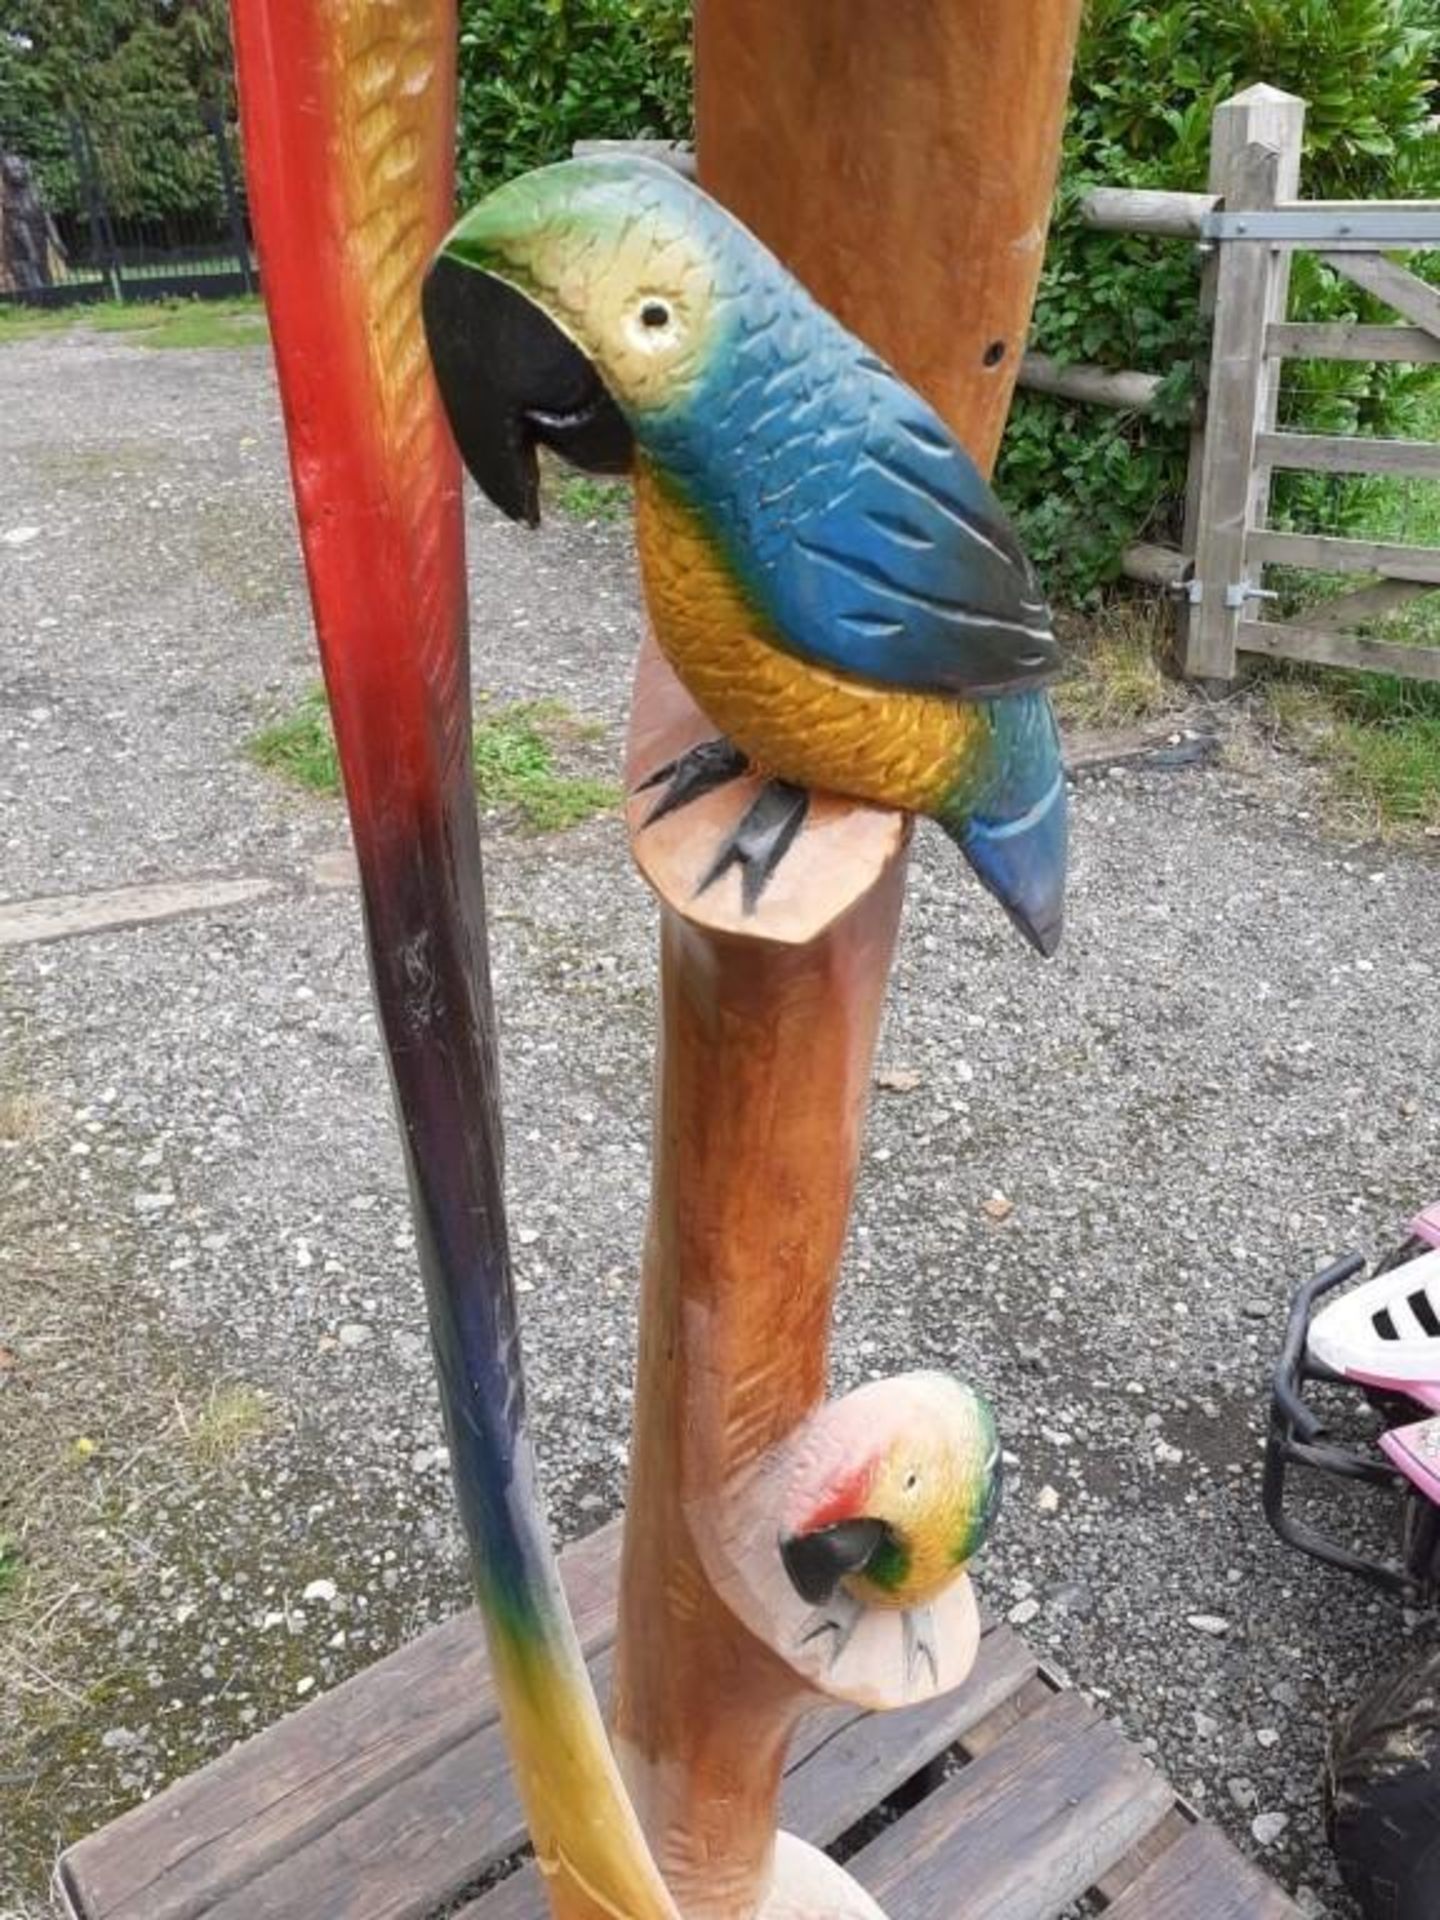 1 x 1.7-Metre Tall Wooden Sculpture Featuring 3 Colourful Parrots - Dimensions: Height 170cm x - Image 9 of 9